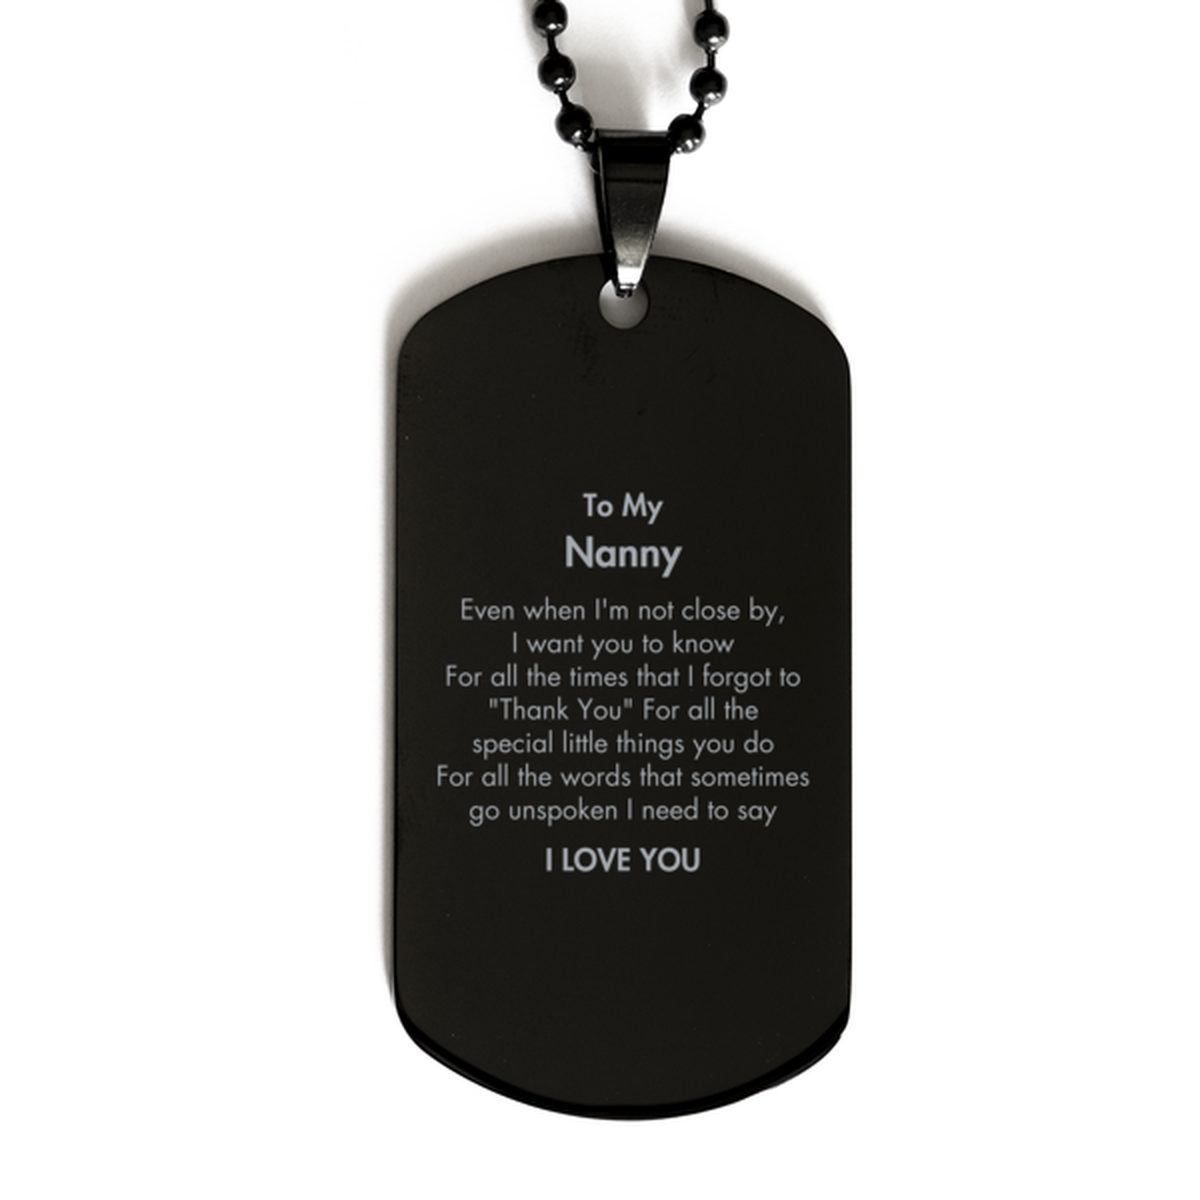 Thank You Gifts for Nanny, Keepsake Black Dog Tag Gifts for Nanny Birthday Mother's day Father's Day Nanny For all the words That sometimes go unspoken I need to say I LOVE YOU